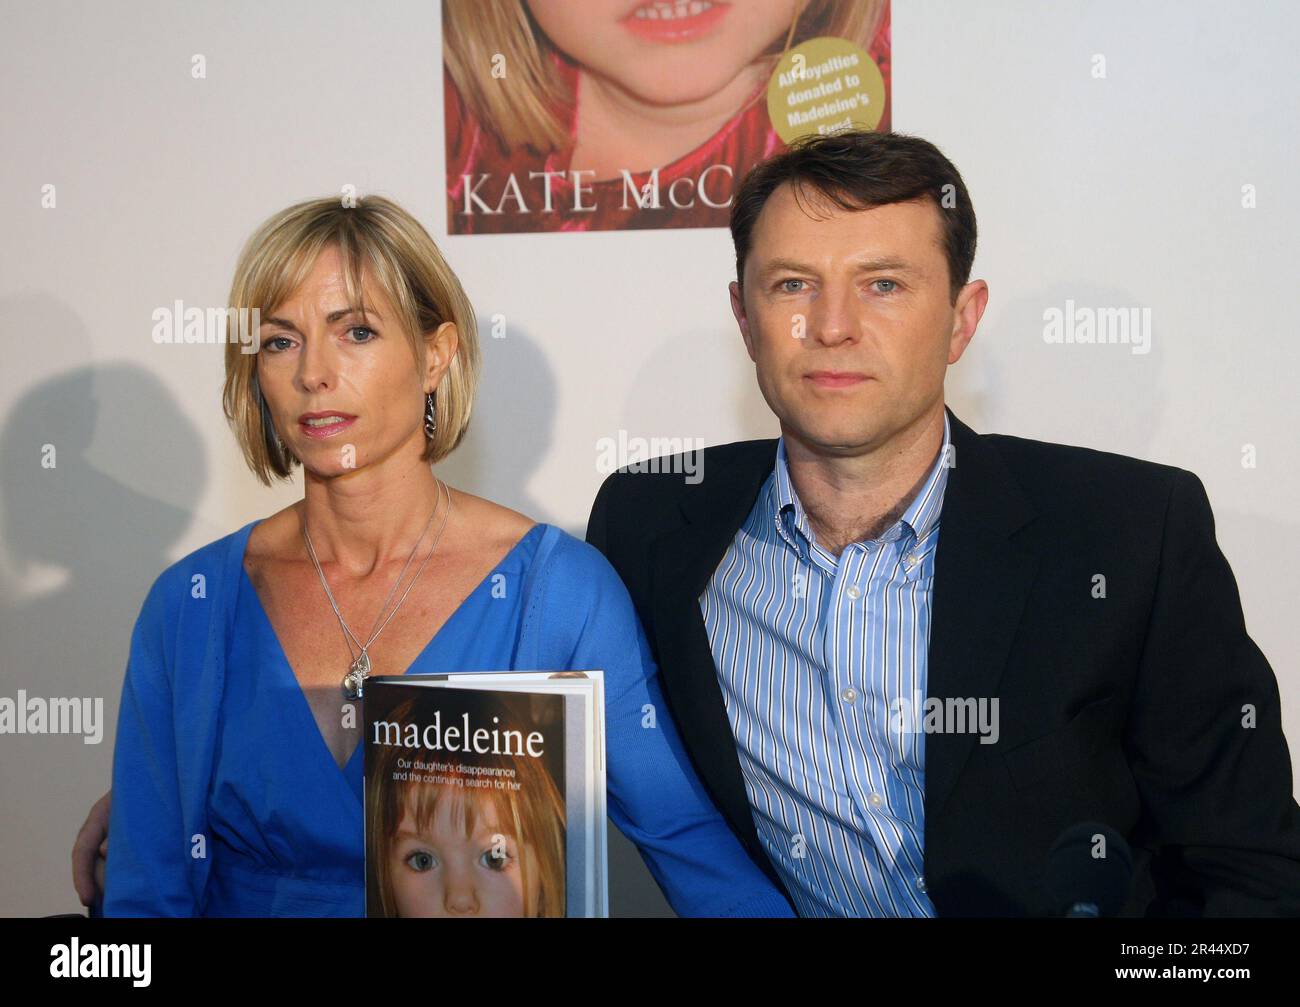 The parents of Madeleine, Kate and Gerry McCann launch their book 'Madeleine' in London on their daughter's 8th birthday. Stock Photo